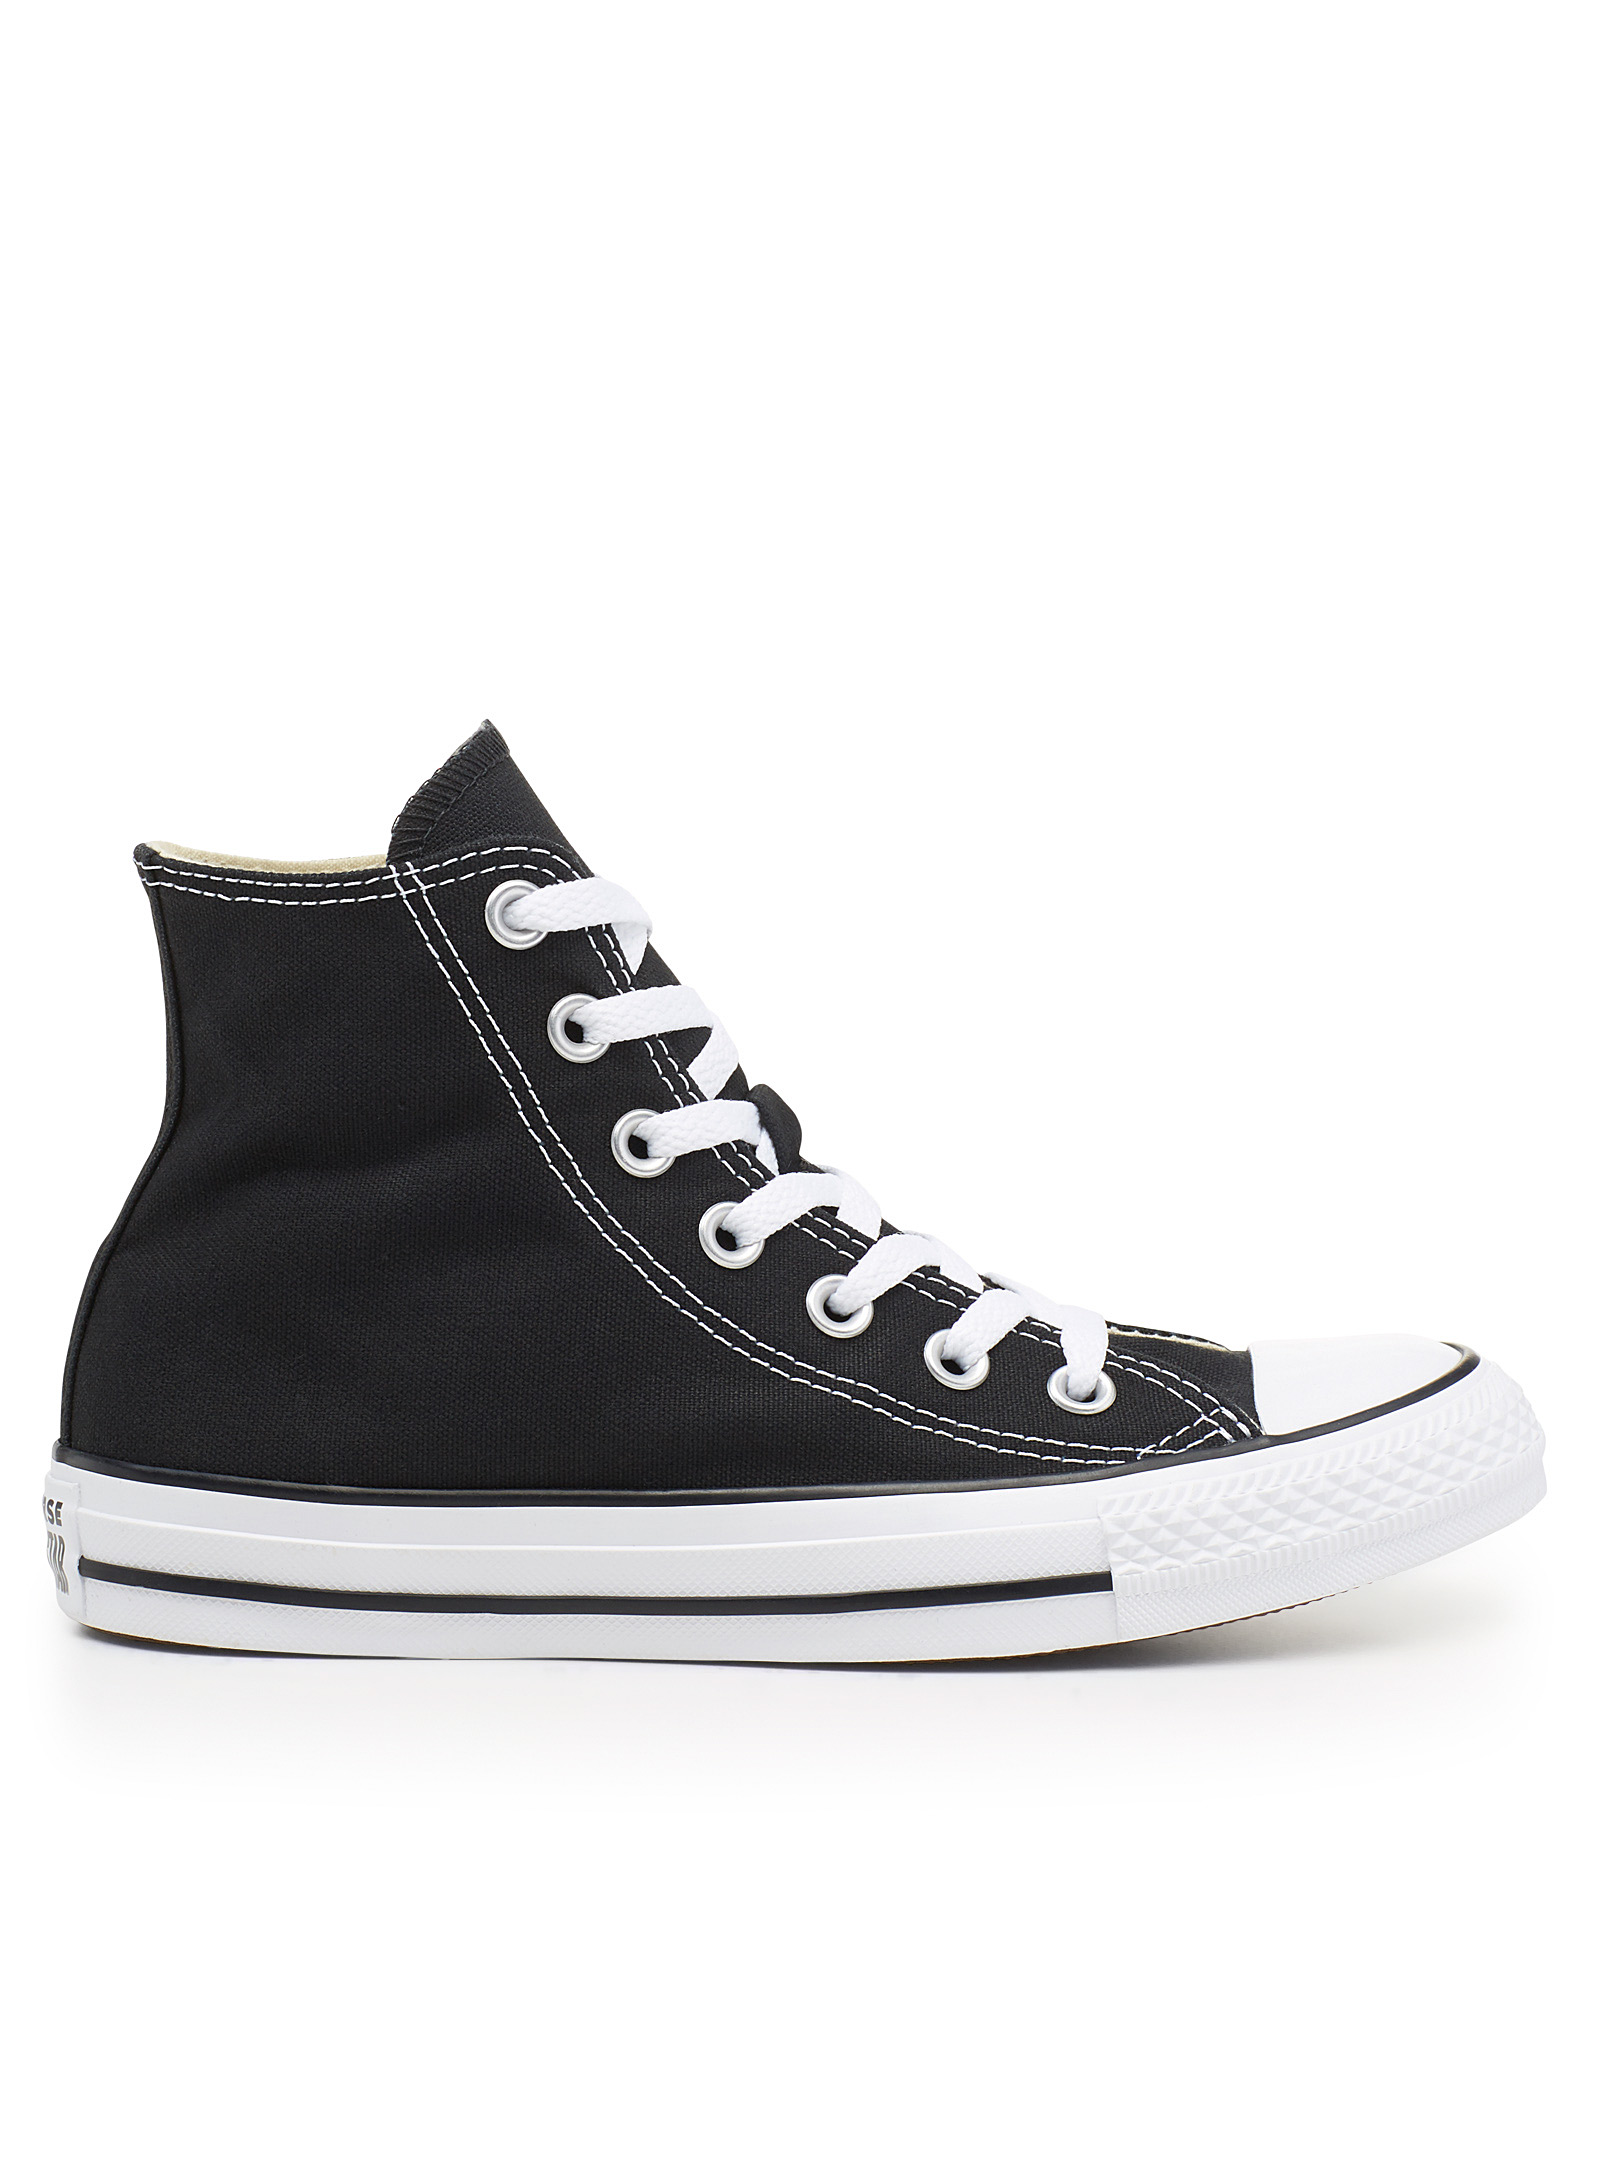 Converse Chuck Taylor All Star High Top Sneakers Women In Black